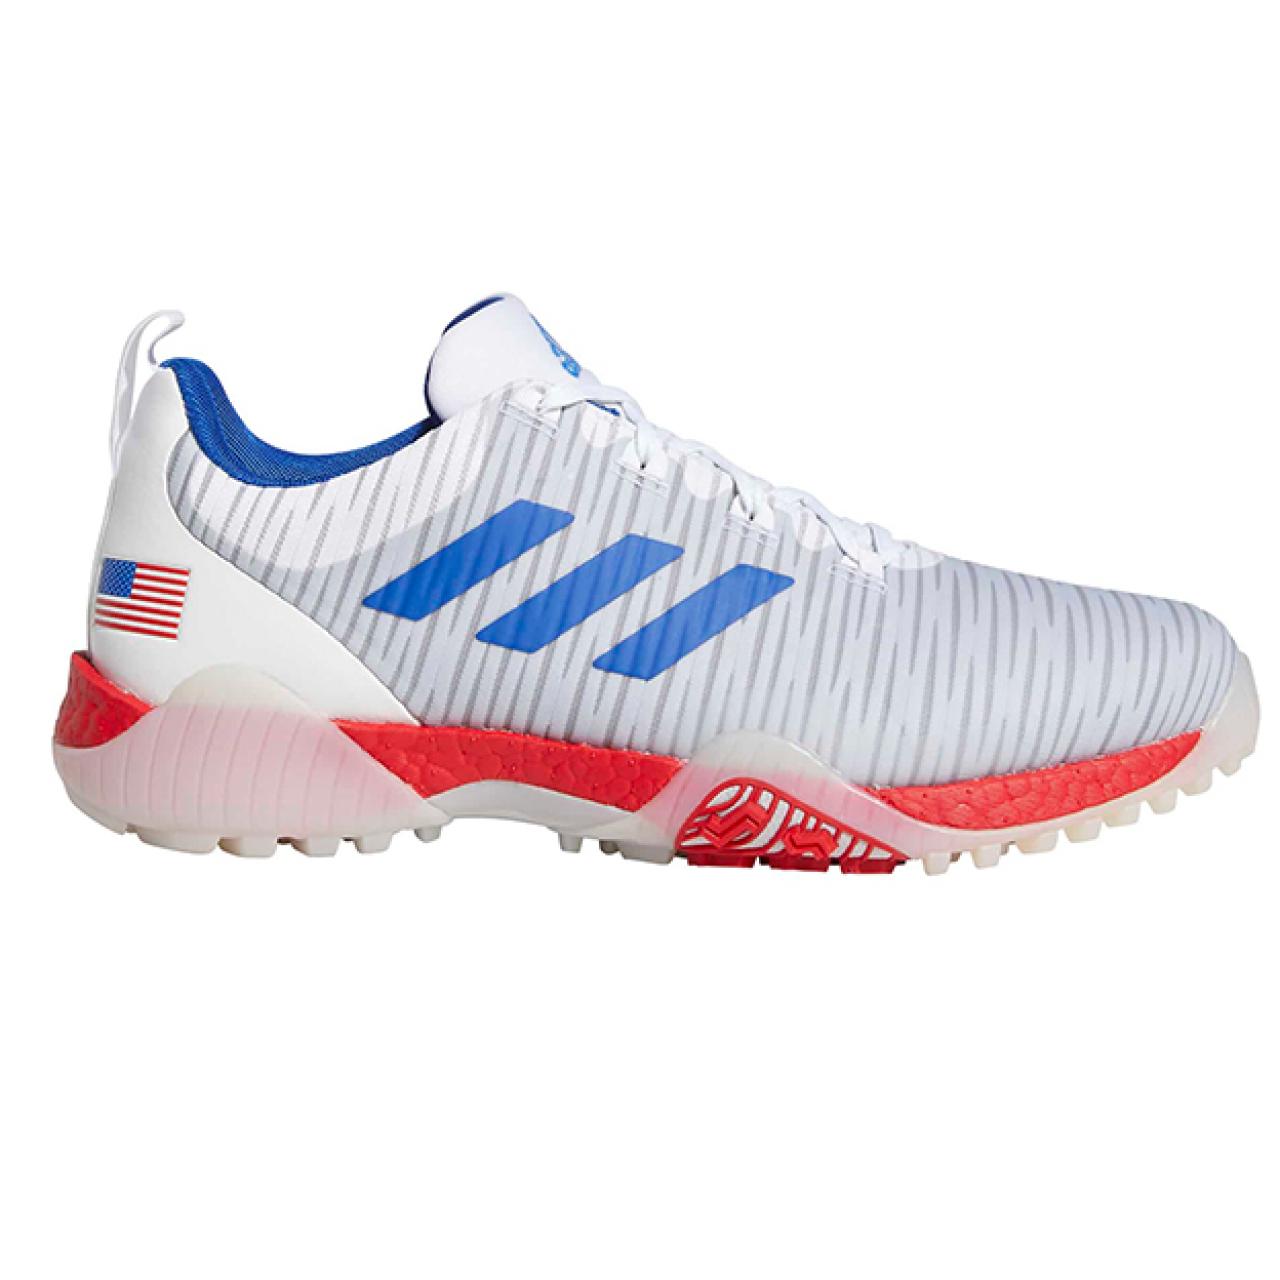 Grifo Sacrificio toxicidad Adidas releases Codechaos golf shoes in ultra-patriotic, limited-edition  version | Golf Equipment: Clubs, Balls, Bags | GolfDigest.com